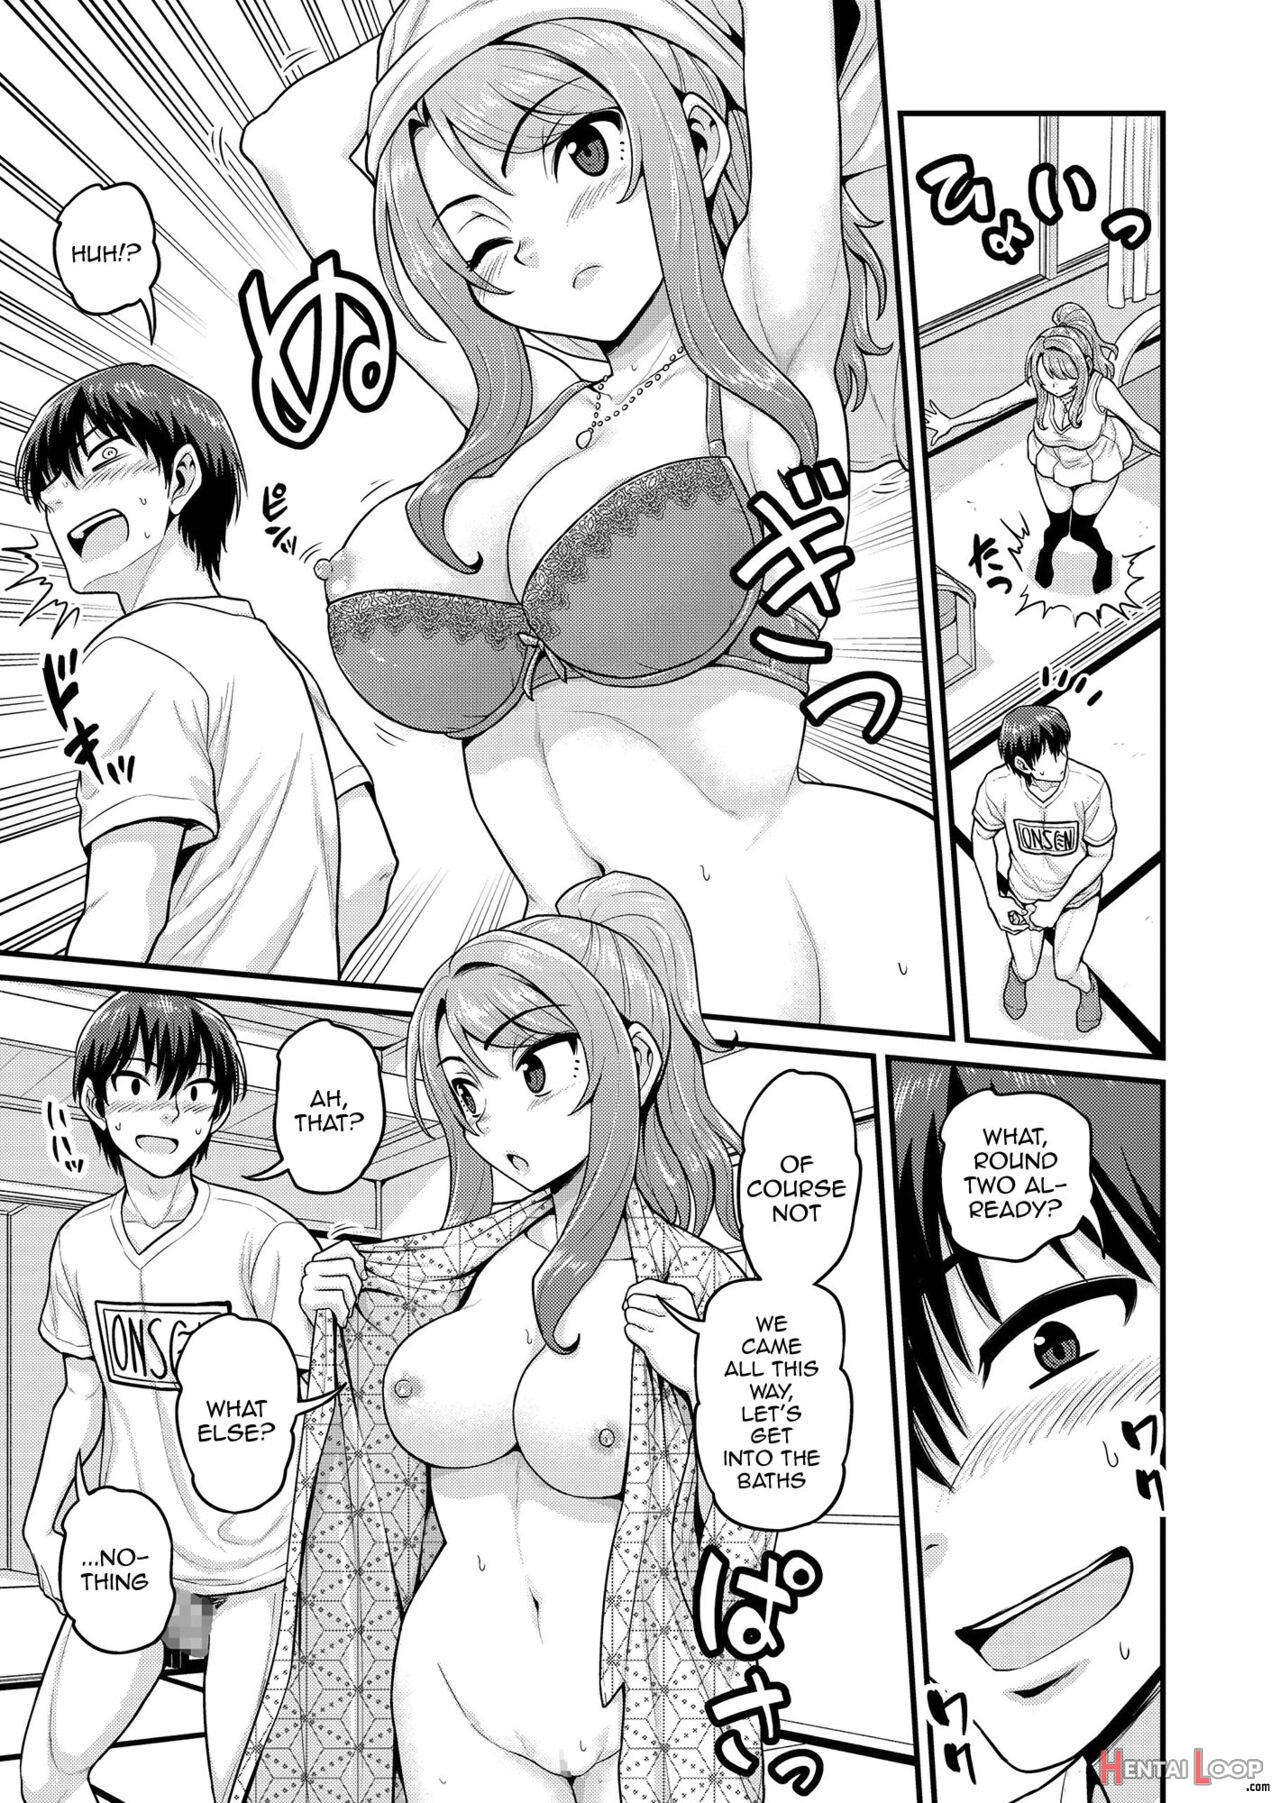 Smashing With Your Gamer Girl Friend At The Hot Spring - Ntr Version page 8